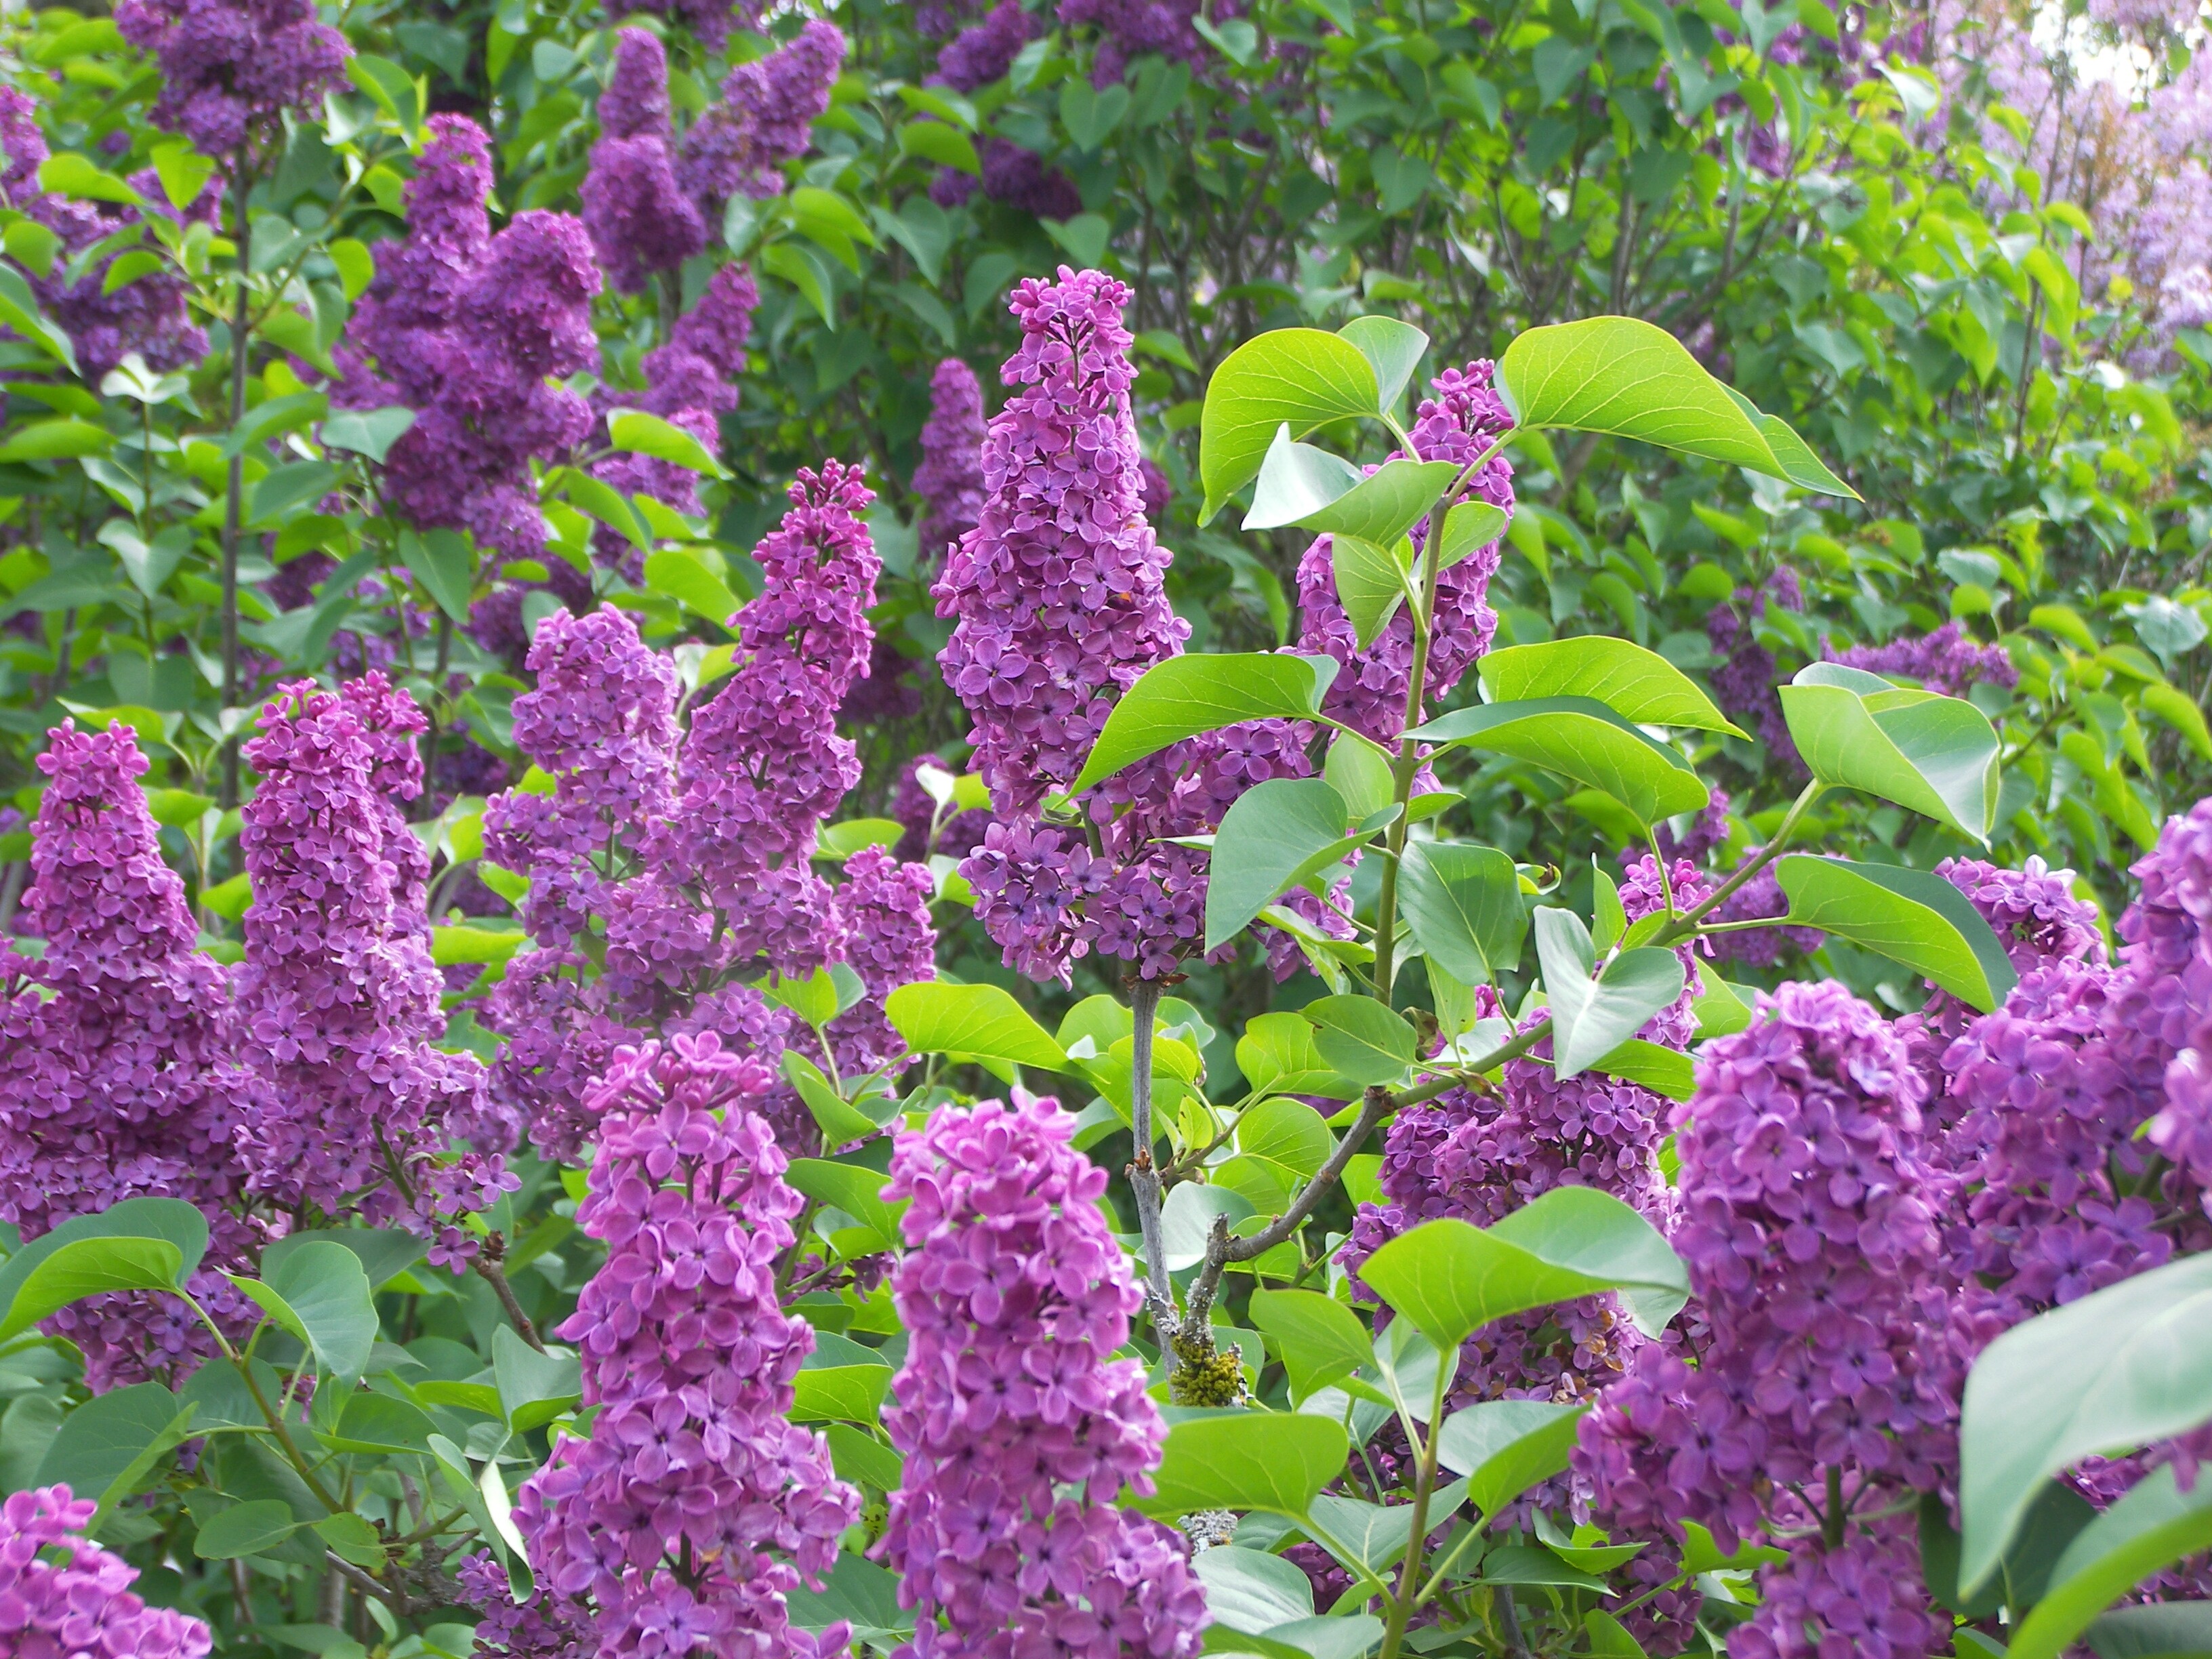 WHITMAN'S TRINITY OF REMEMBRANCE: WHEN LILACS LAST IN THE DOOR-YARD ...